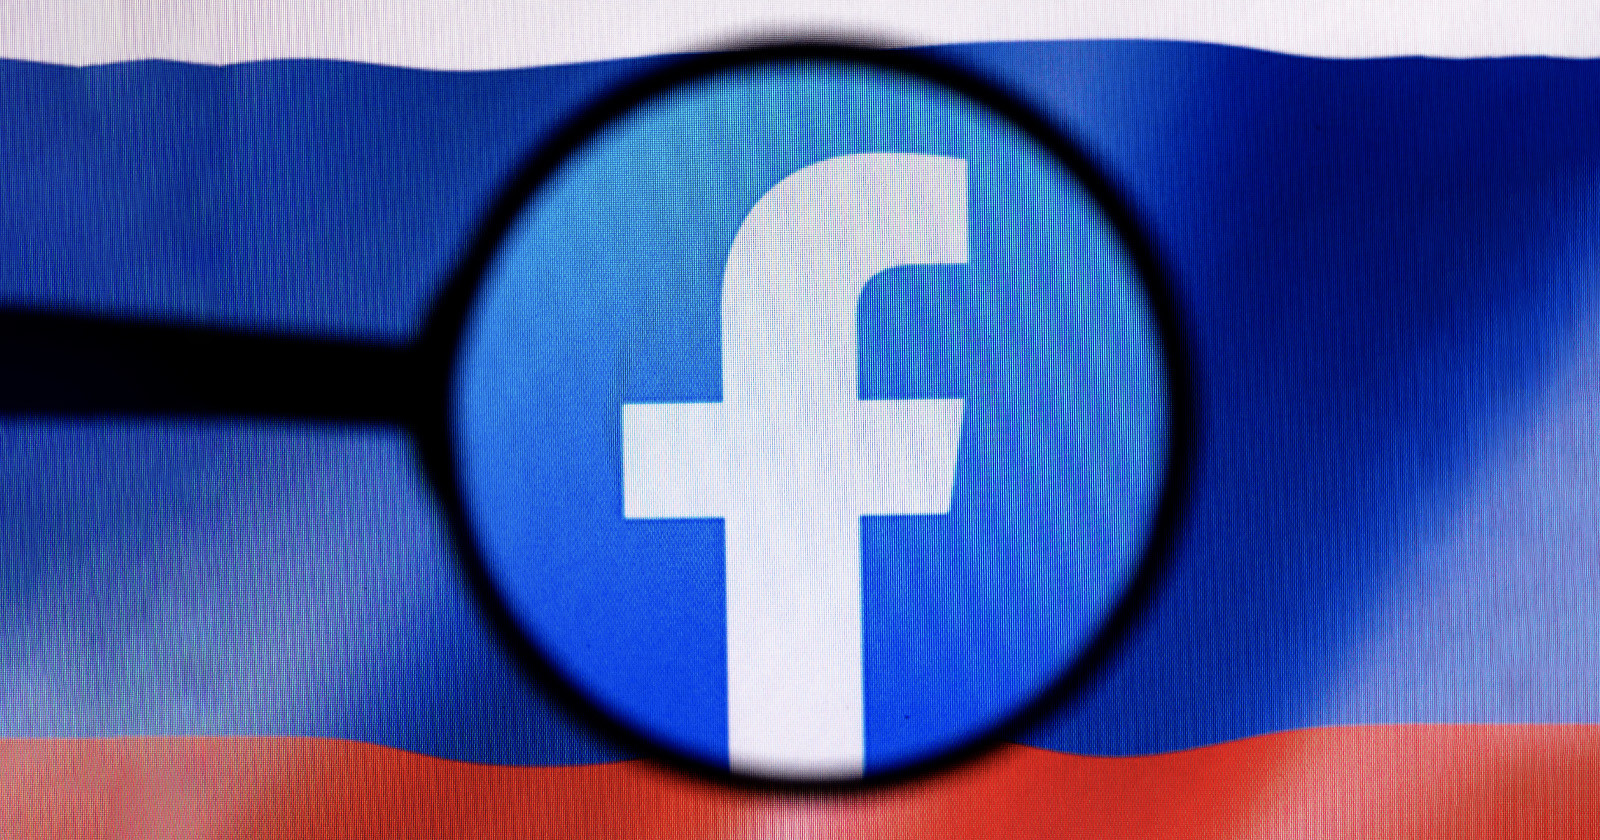 Russia Has Blocked Access to Facebook and Twitter